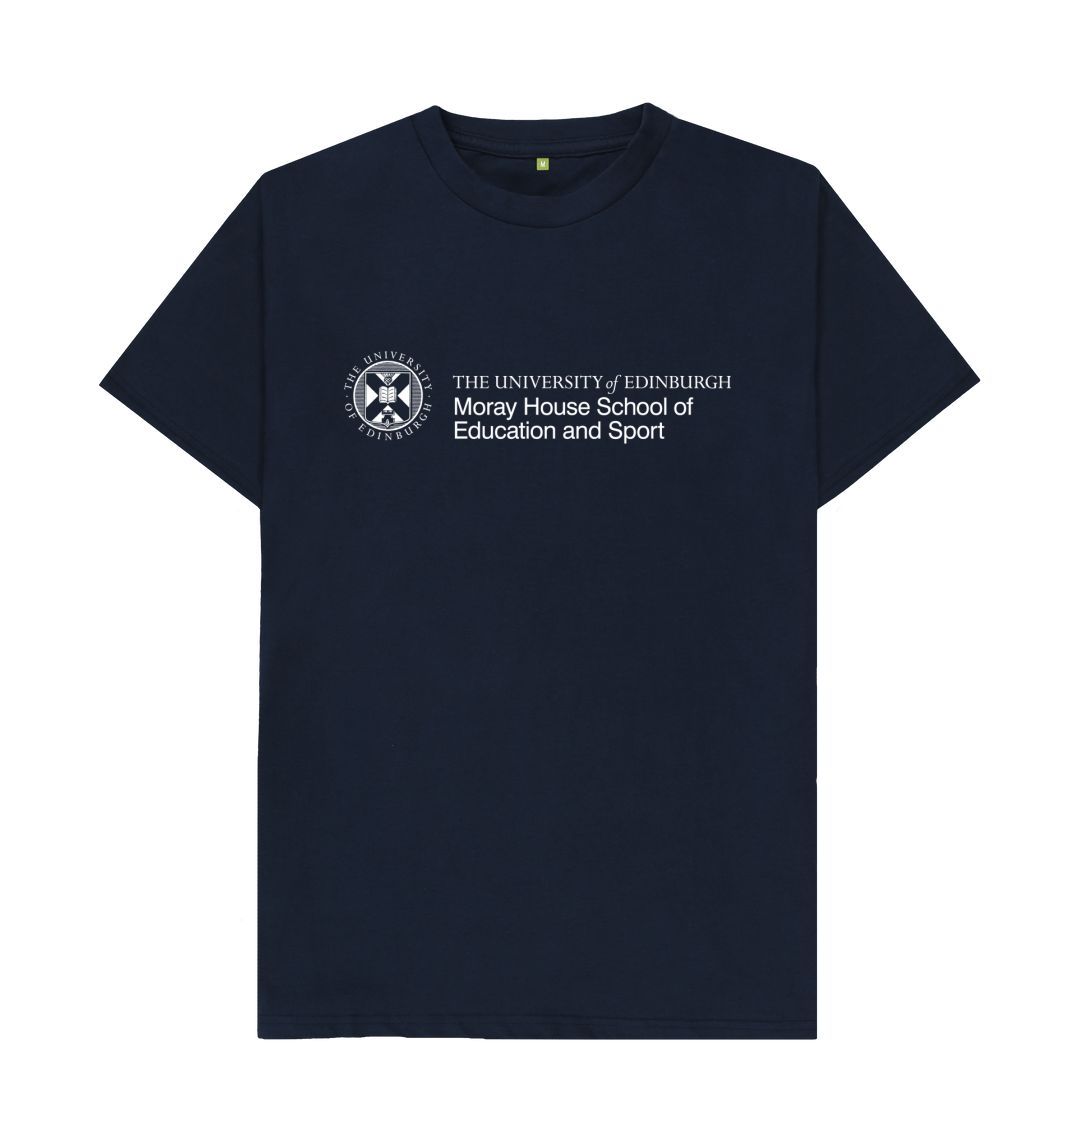 Navy T -Shirt with white University crest and text that reads ' University of Edinburgh : Moray House School of Education and Sport'